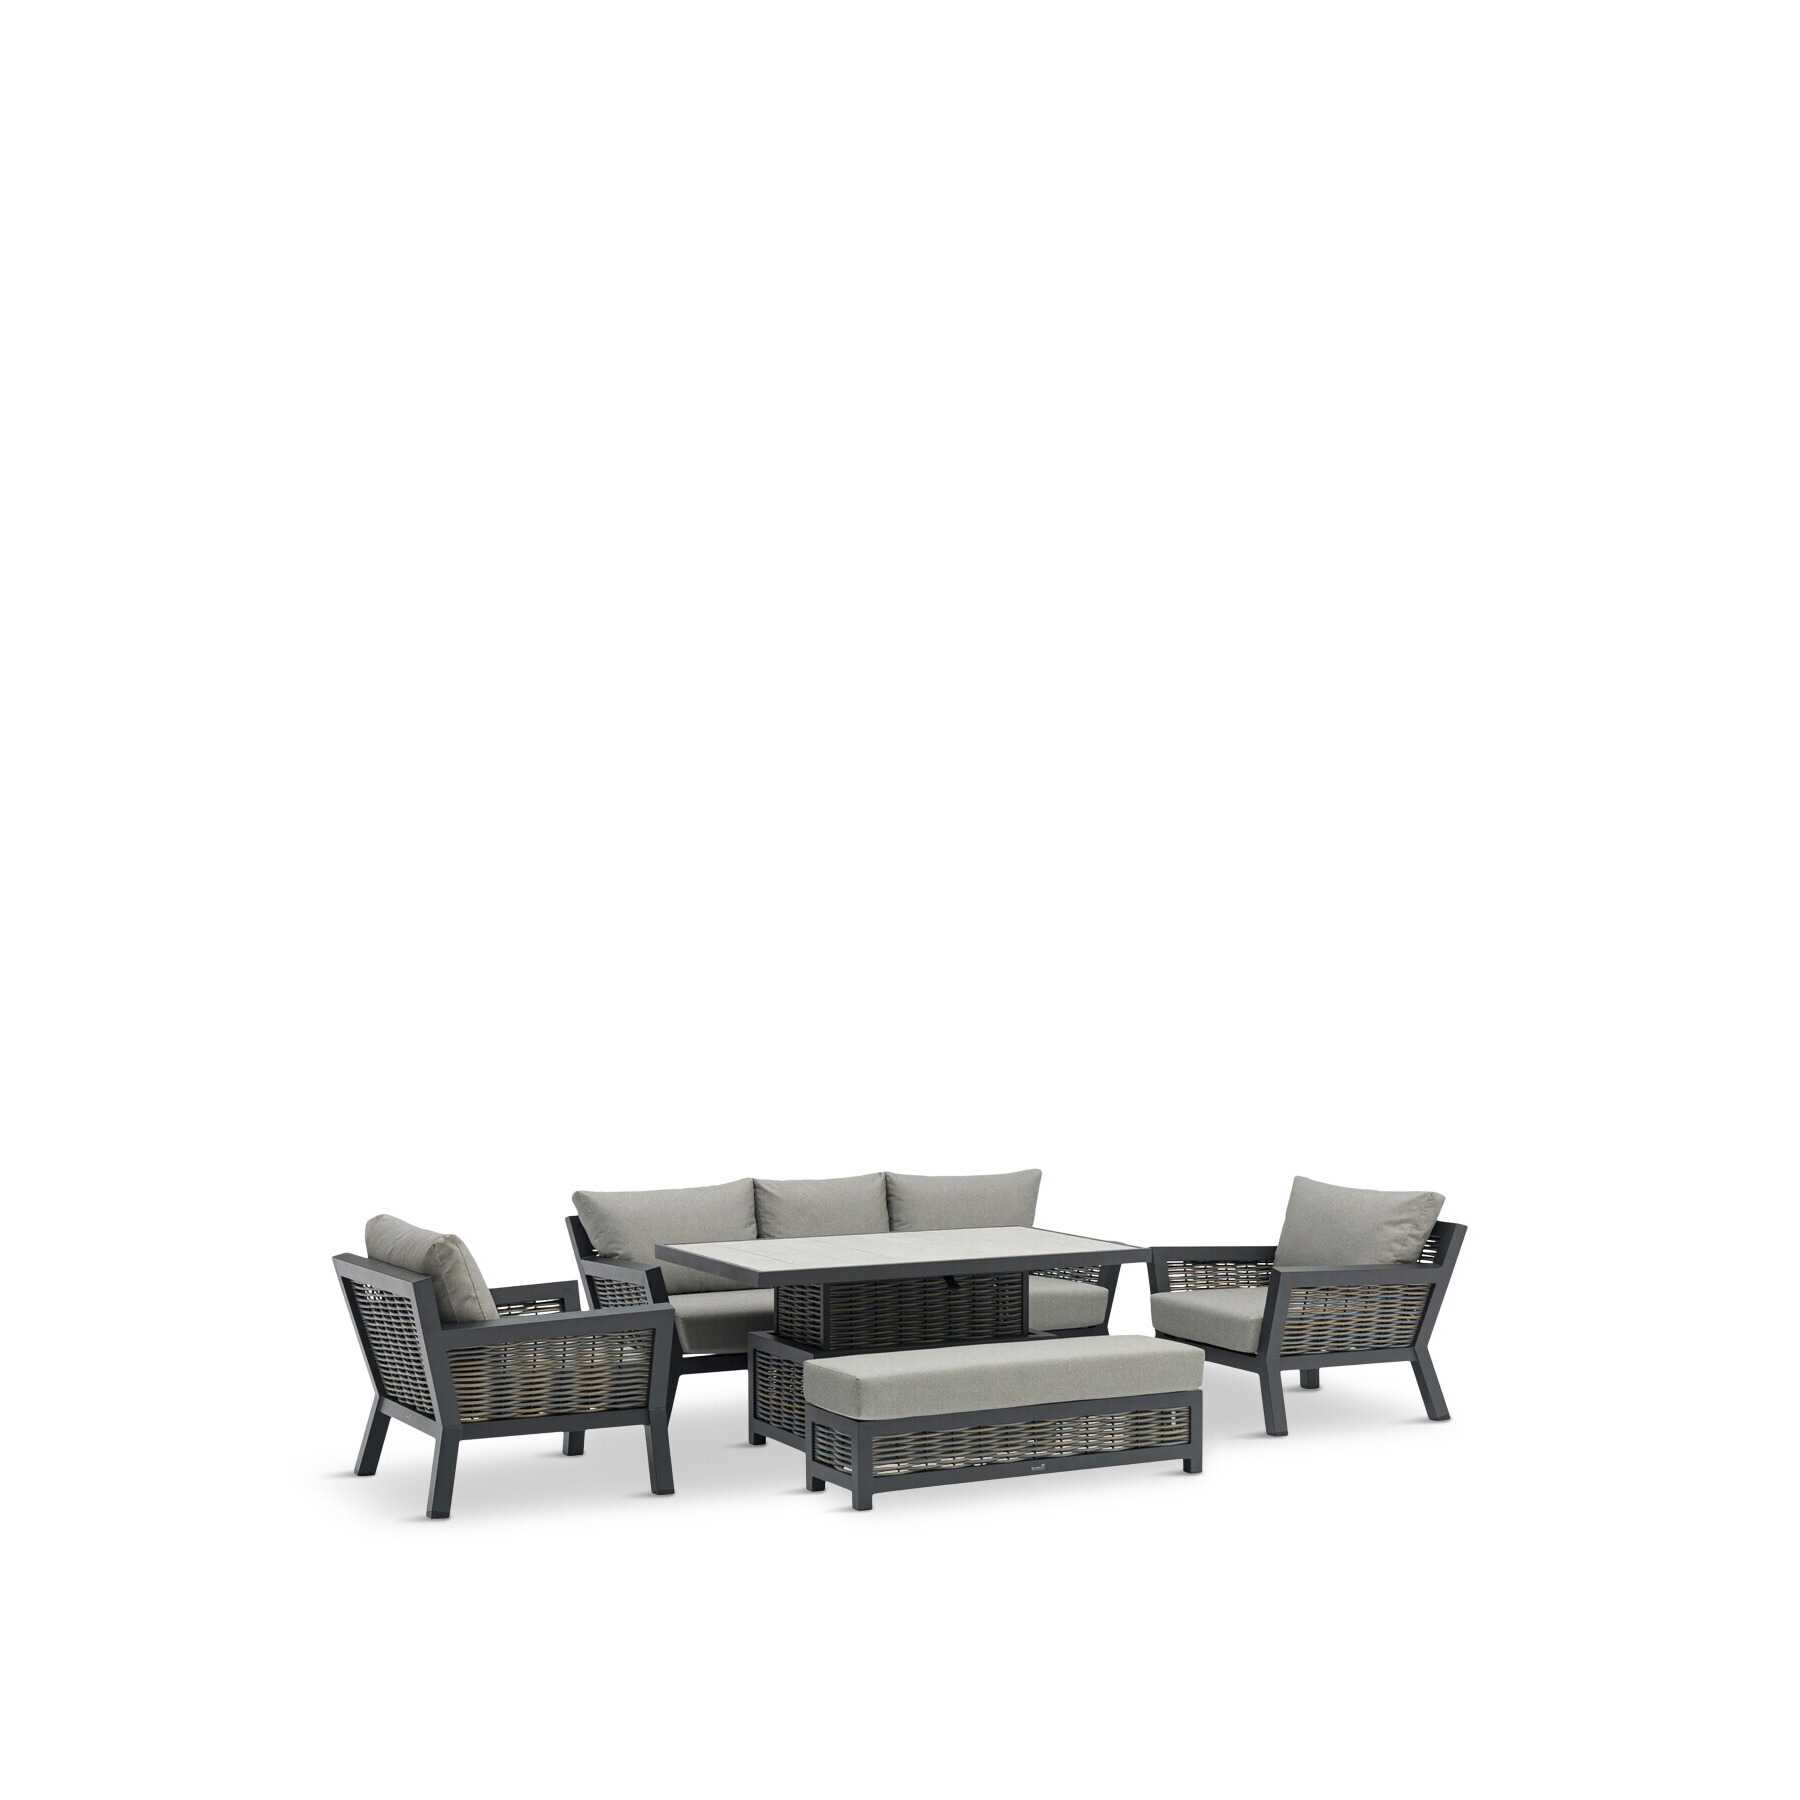 Bramblecrest Tuscan Lounge Set with Adjustable Height Table, 3 Seat Sofa, 2 Sofa Chairs and Bench Grey - image 1